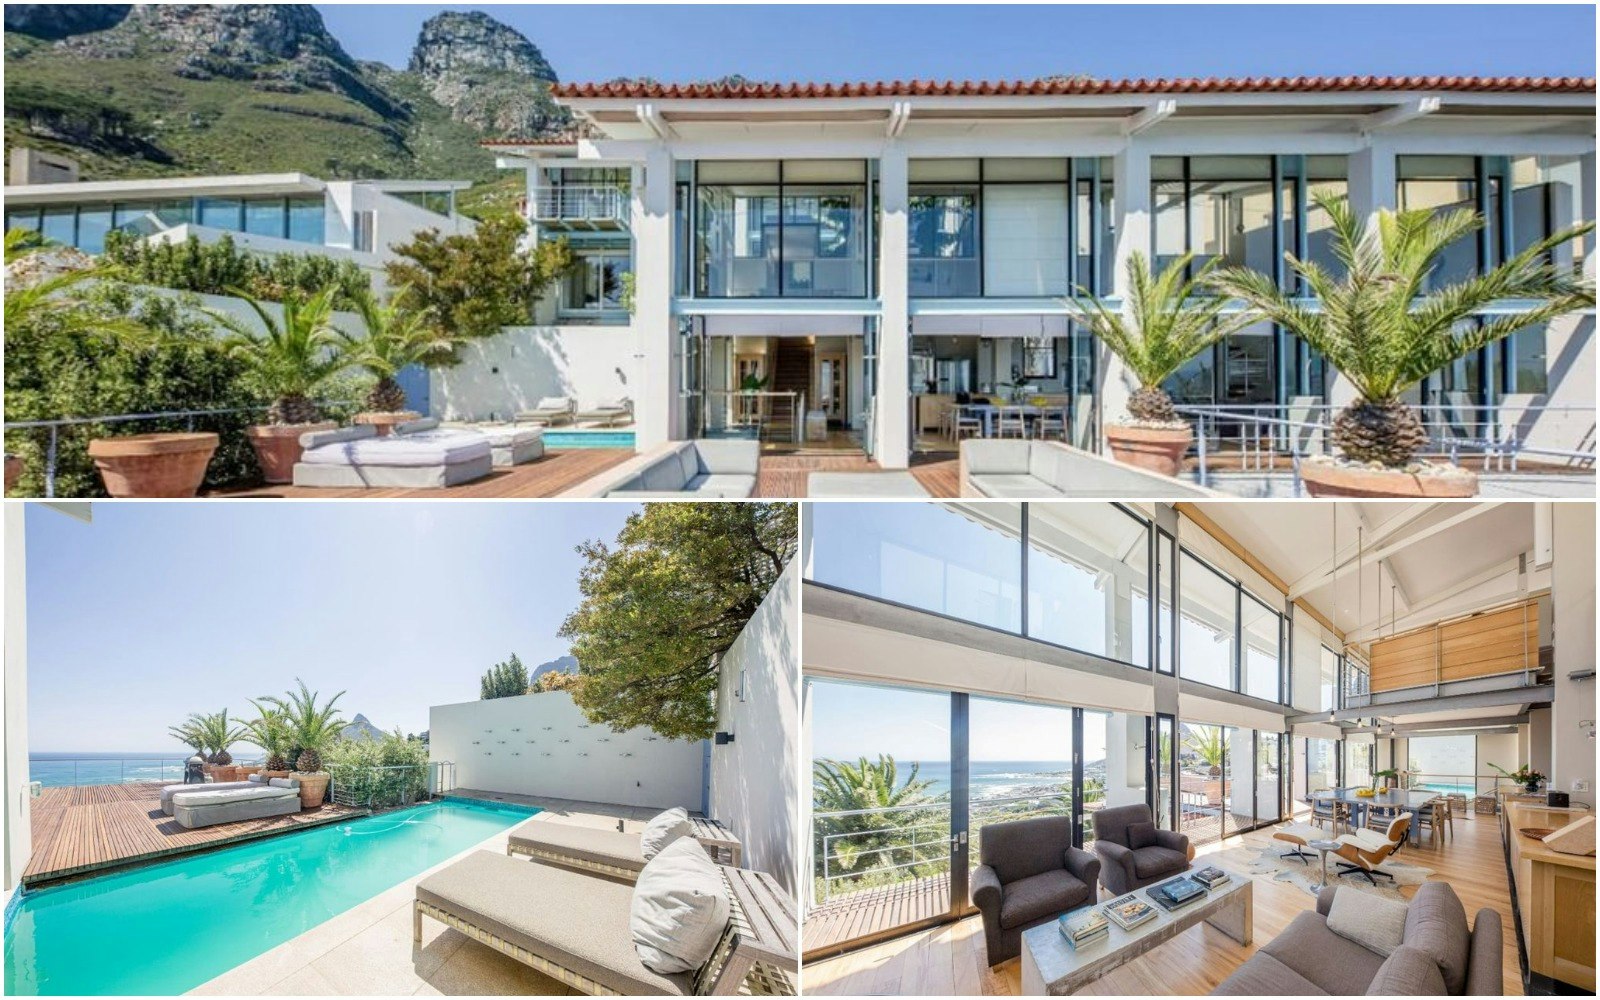 Collage showing the interior, exterior and terrace area of a Cape Town villa